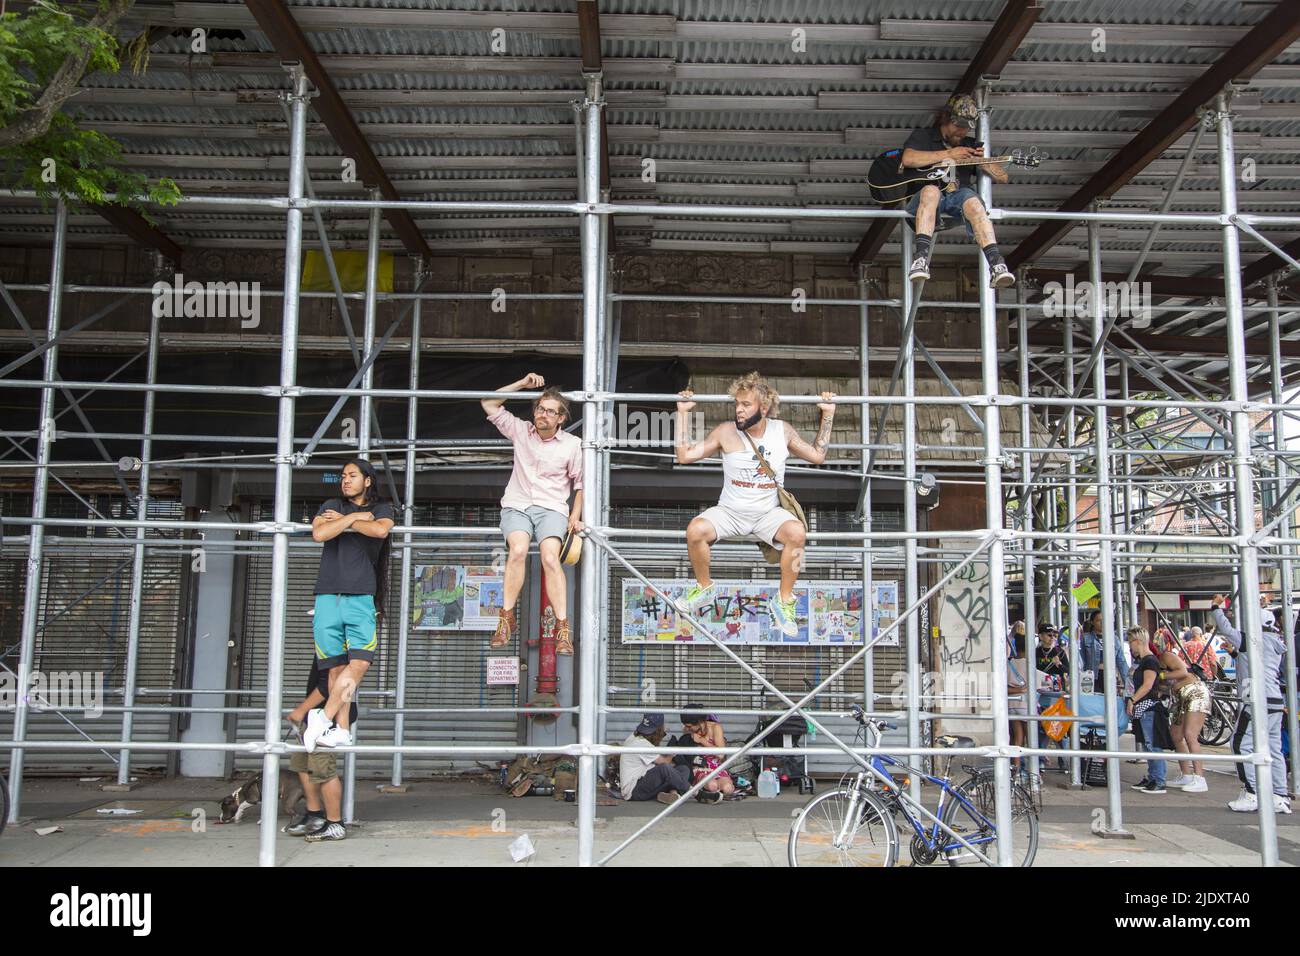 After 2 years from a Covid-19 shutdown, people return to the annual Mermaid Parade, alleged to be the largest art parade in the nation, at Coney Island along Surf Avenue in Brooklyn, New York. Spectstors climb scafolding to get a better view of the parade. Stock Photo